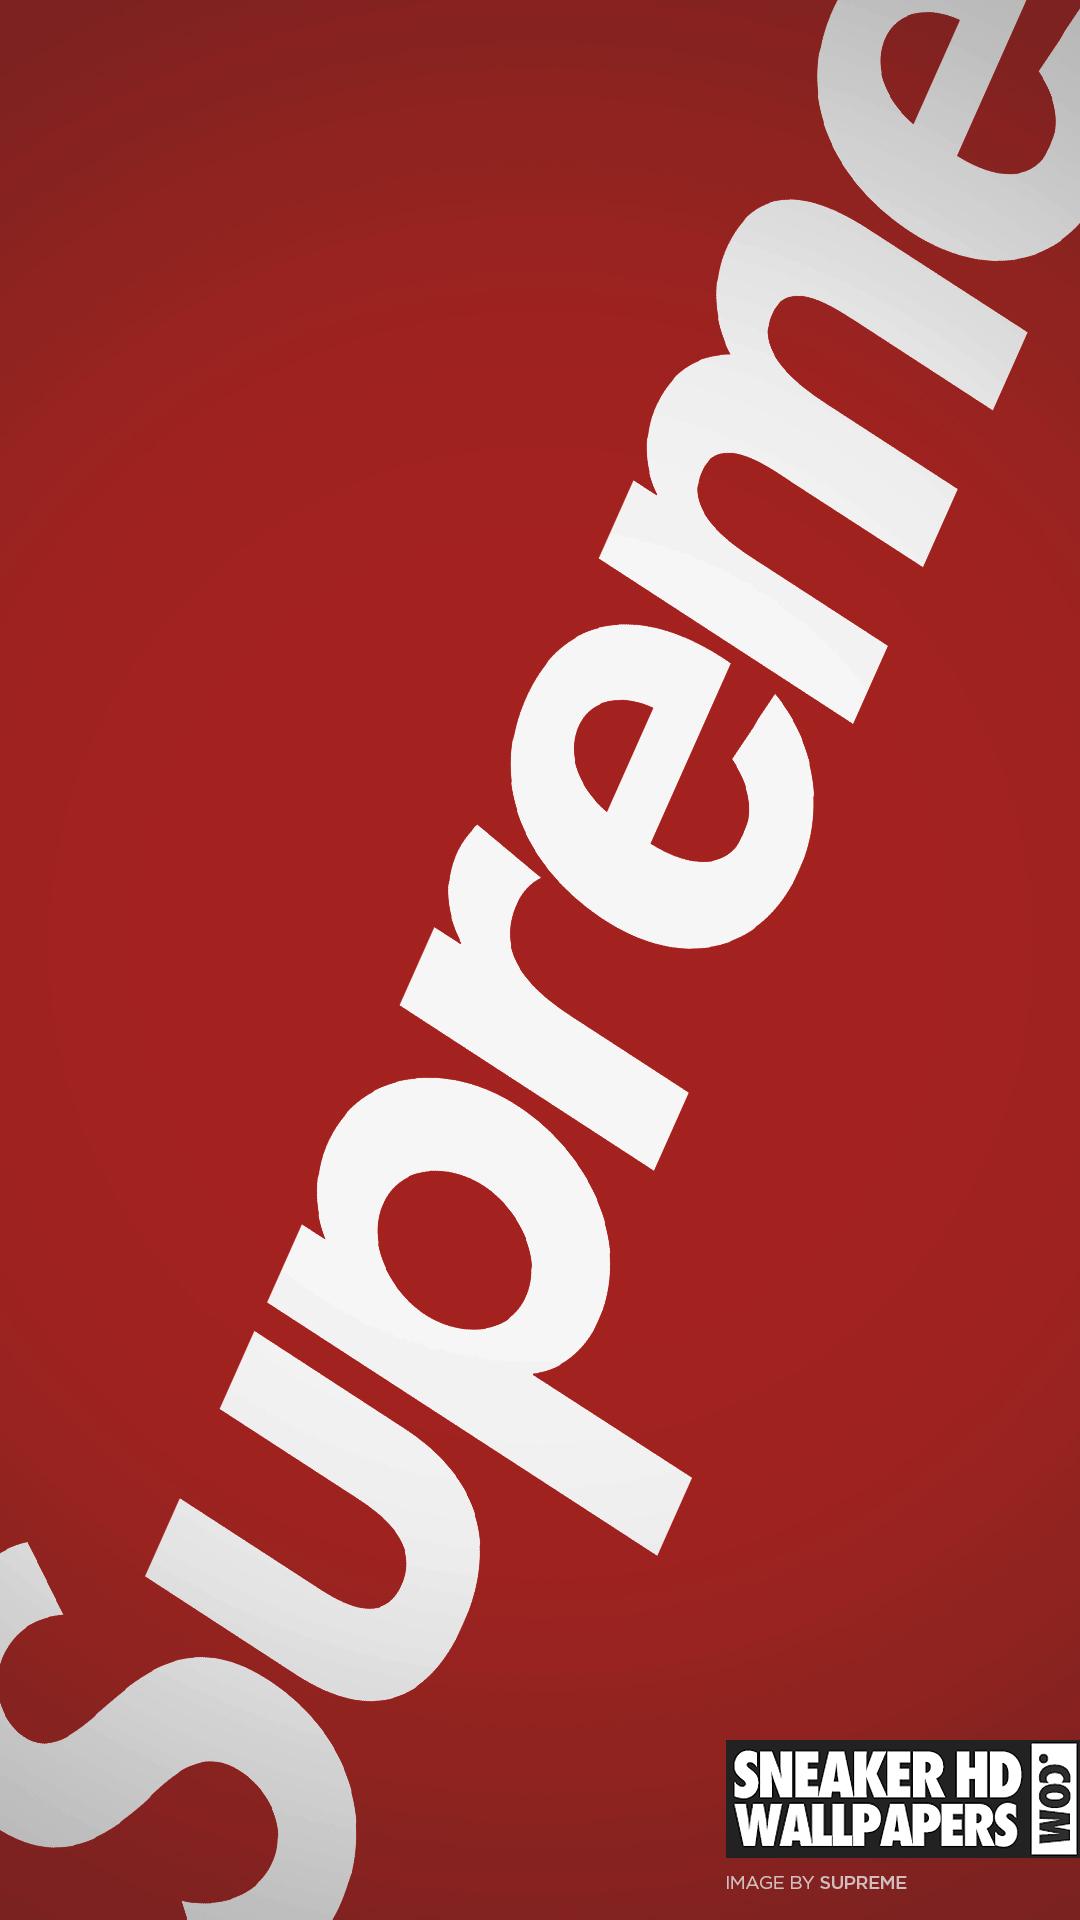 Supreme Live Wallpaper Iphone - Wall.GiftWatches.CO